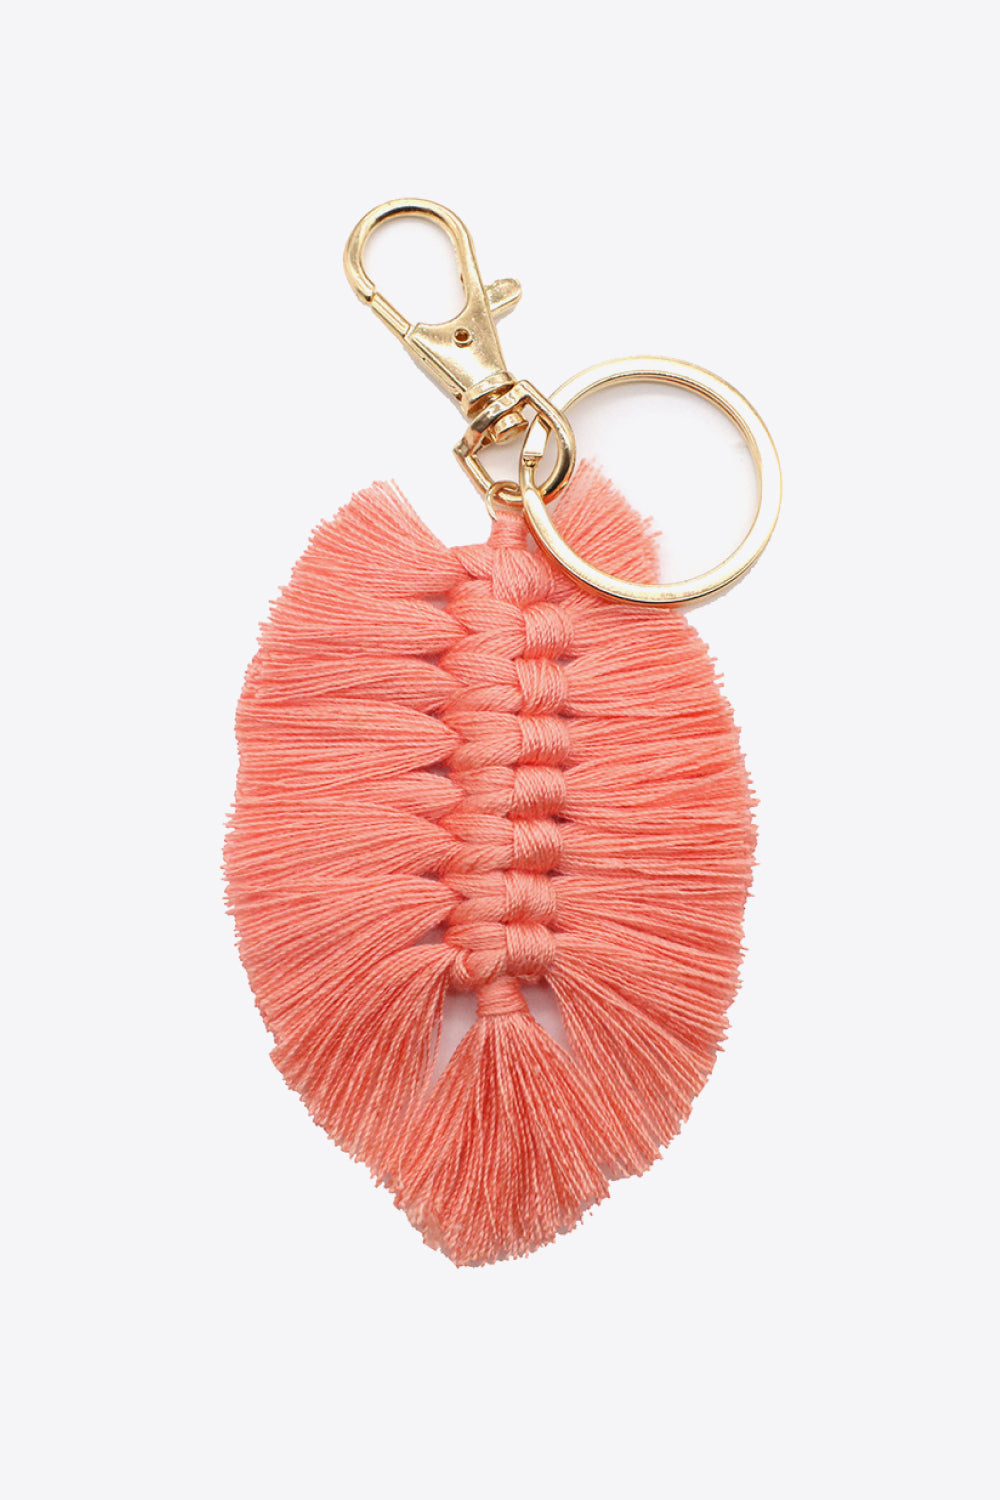 Trendsi Cupid Beauty Supplies Coral / One Size Keychains Assorted 4-Pack Leaf Shape Fringe Keychain